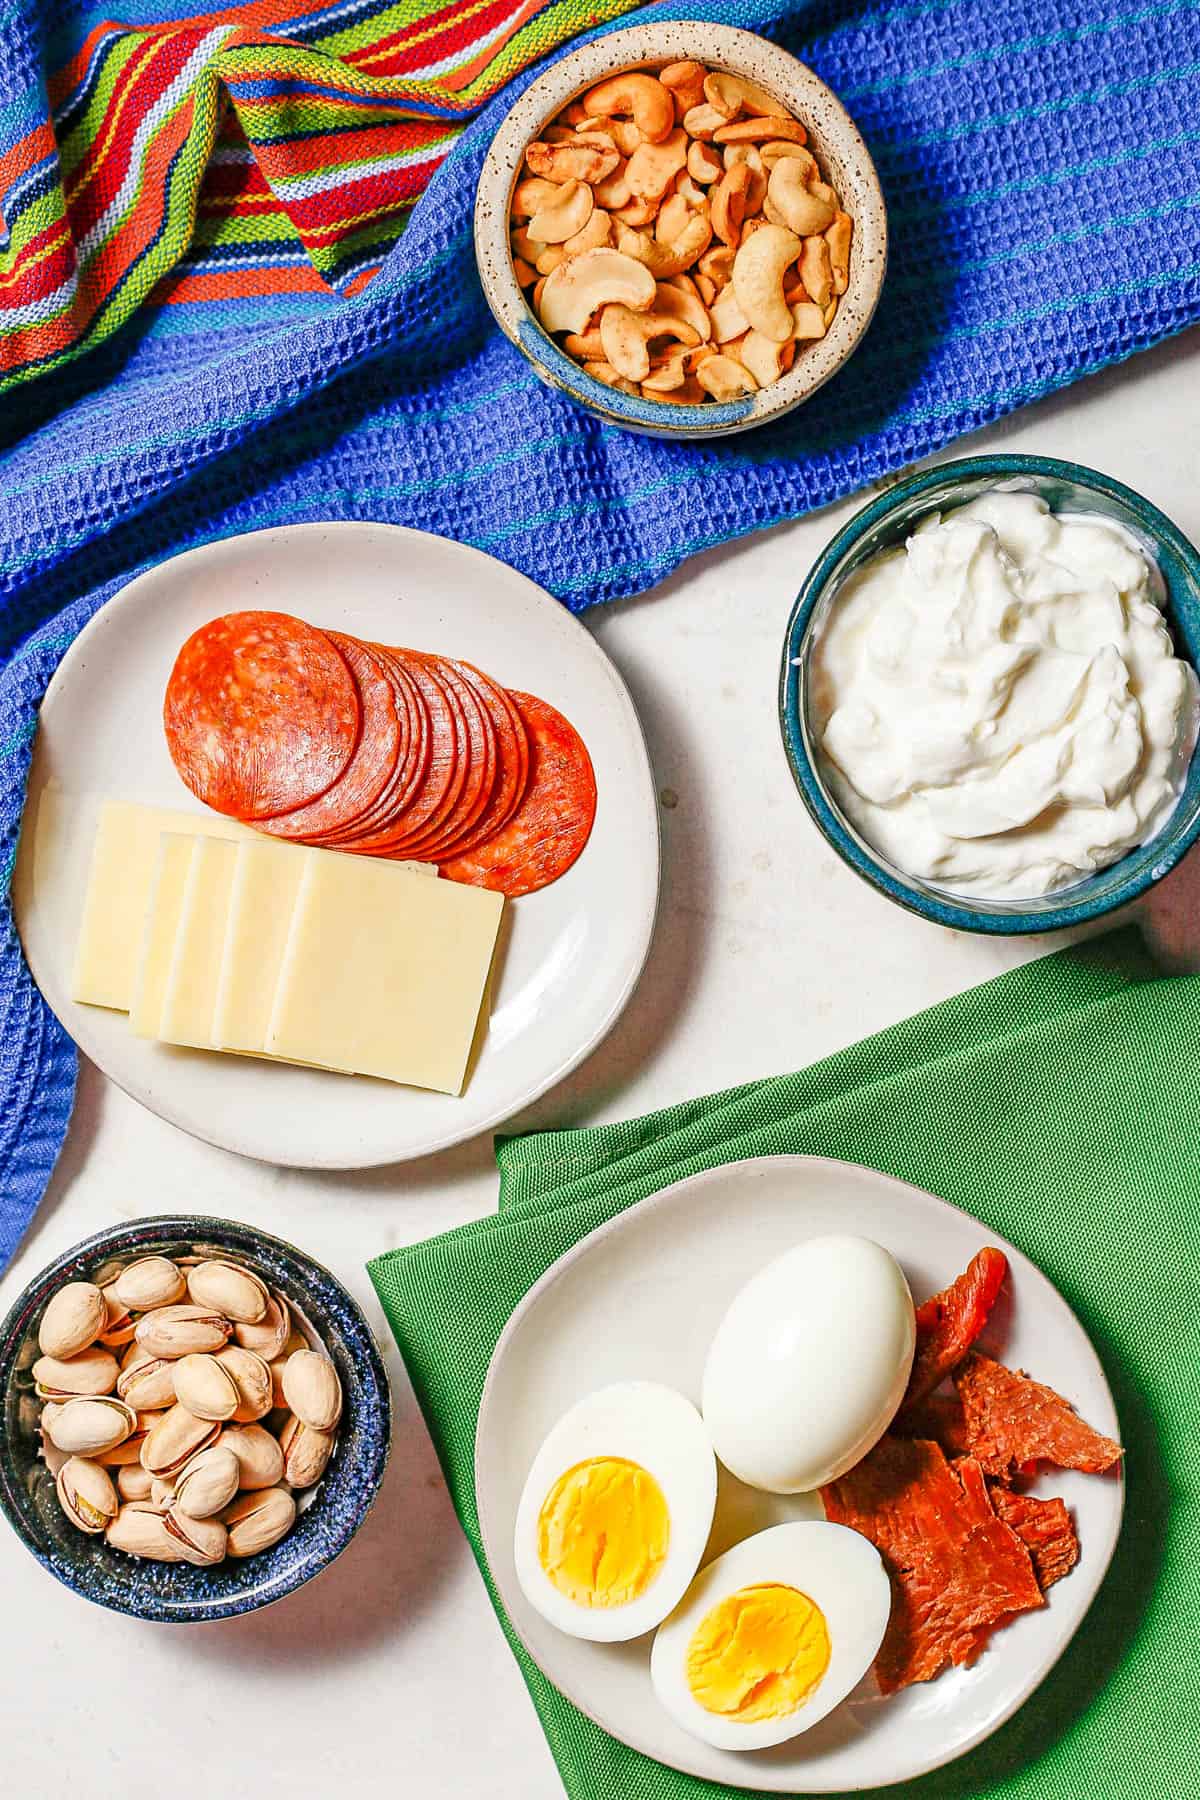 Plates and bowls of different high protein snacks laid out on a counter with colorful napkins.